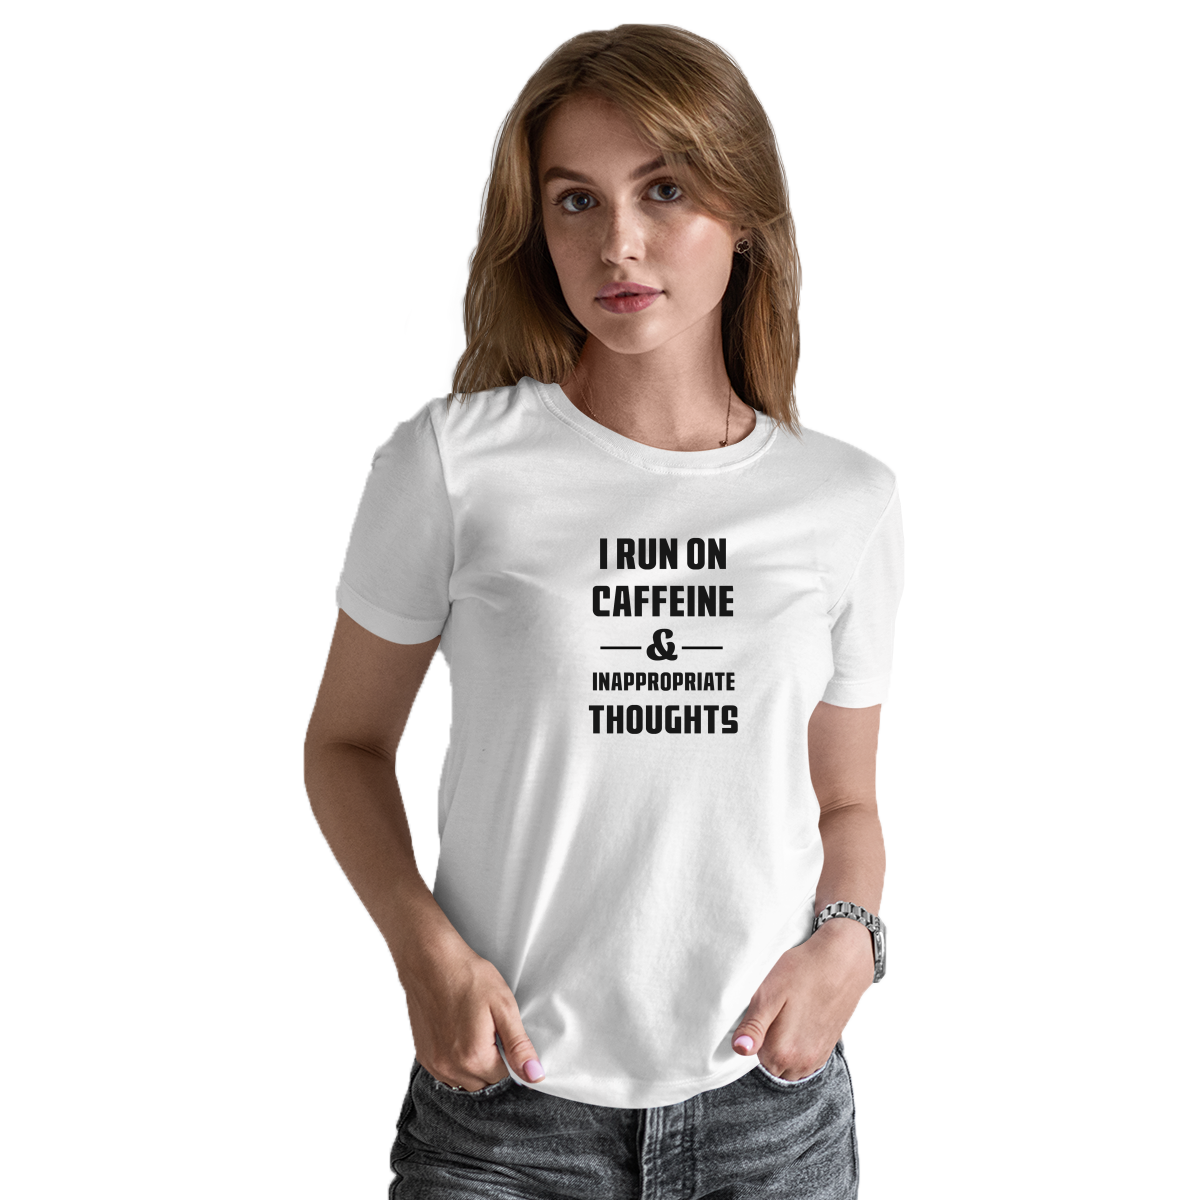 I Run On Caffeine and Inappropriate Thoughts Women's T-shirt | White